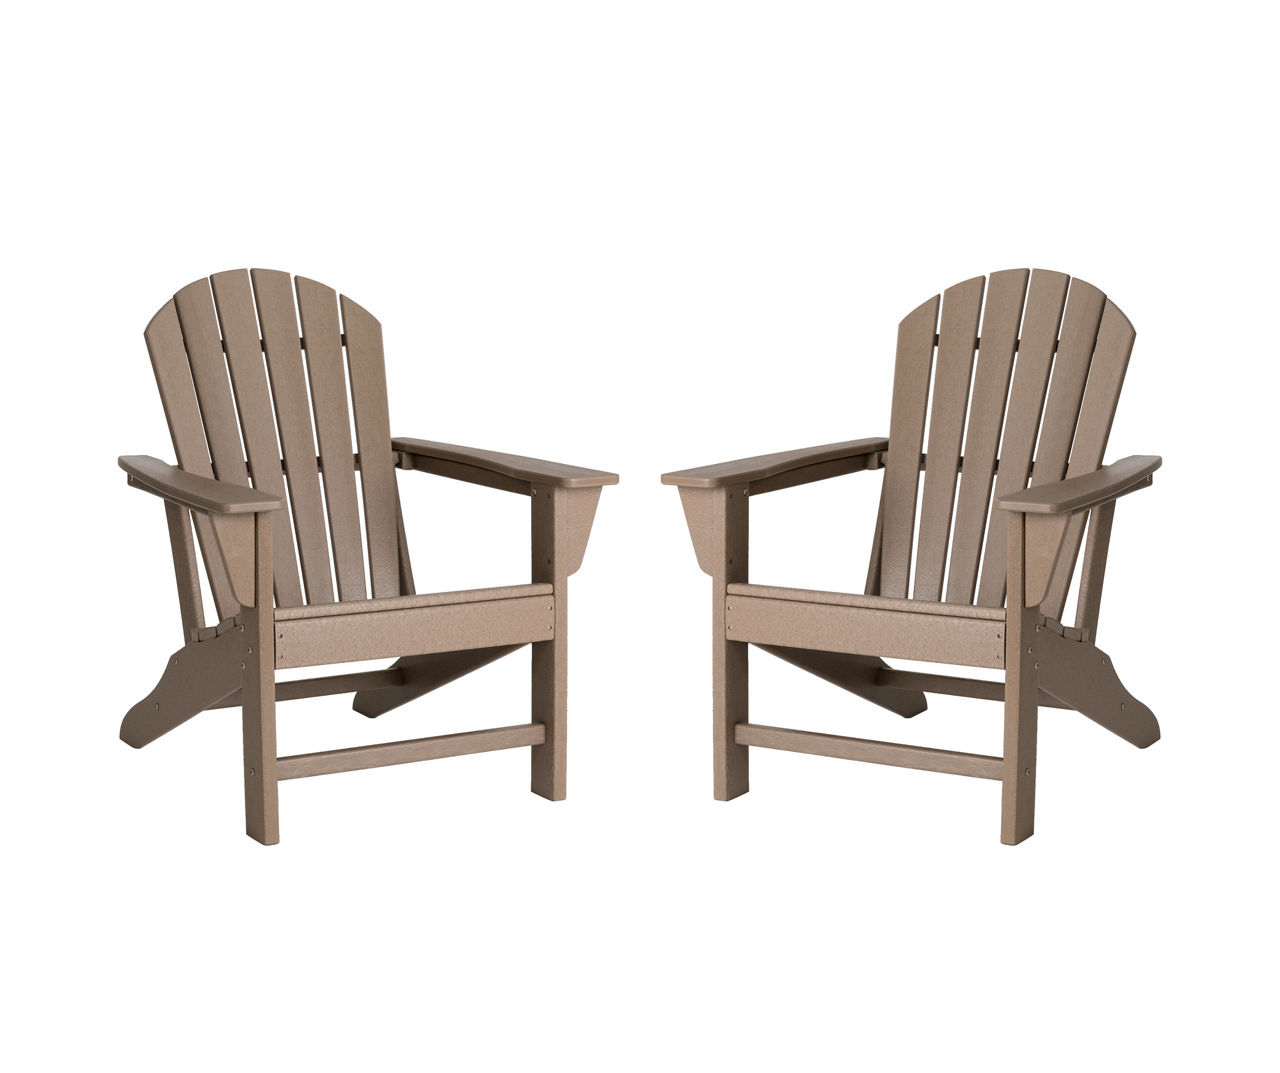 Tan Adirondack HDPE Outdoor Chairs, 2-Pack